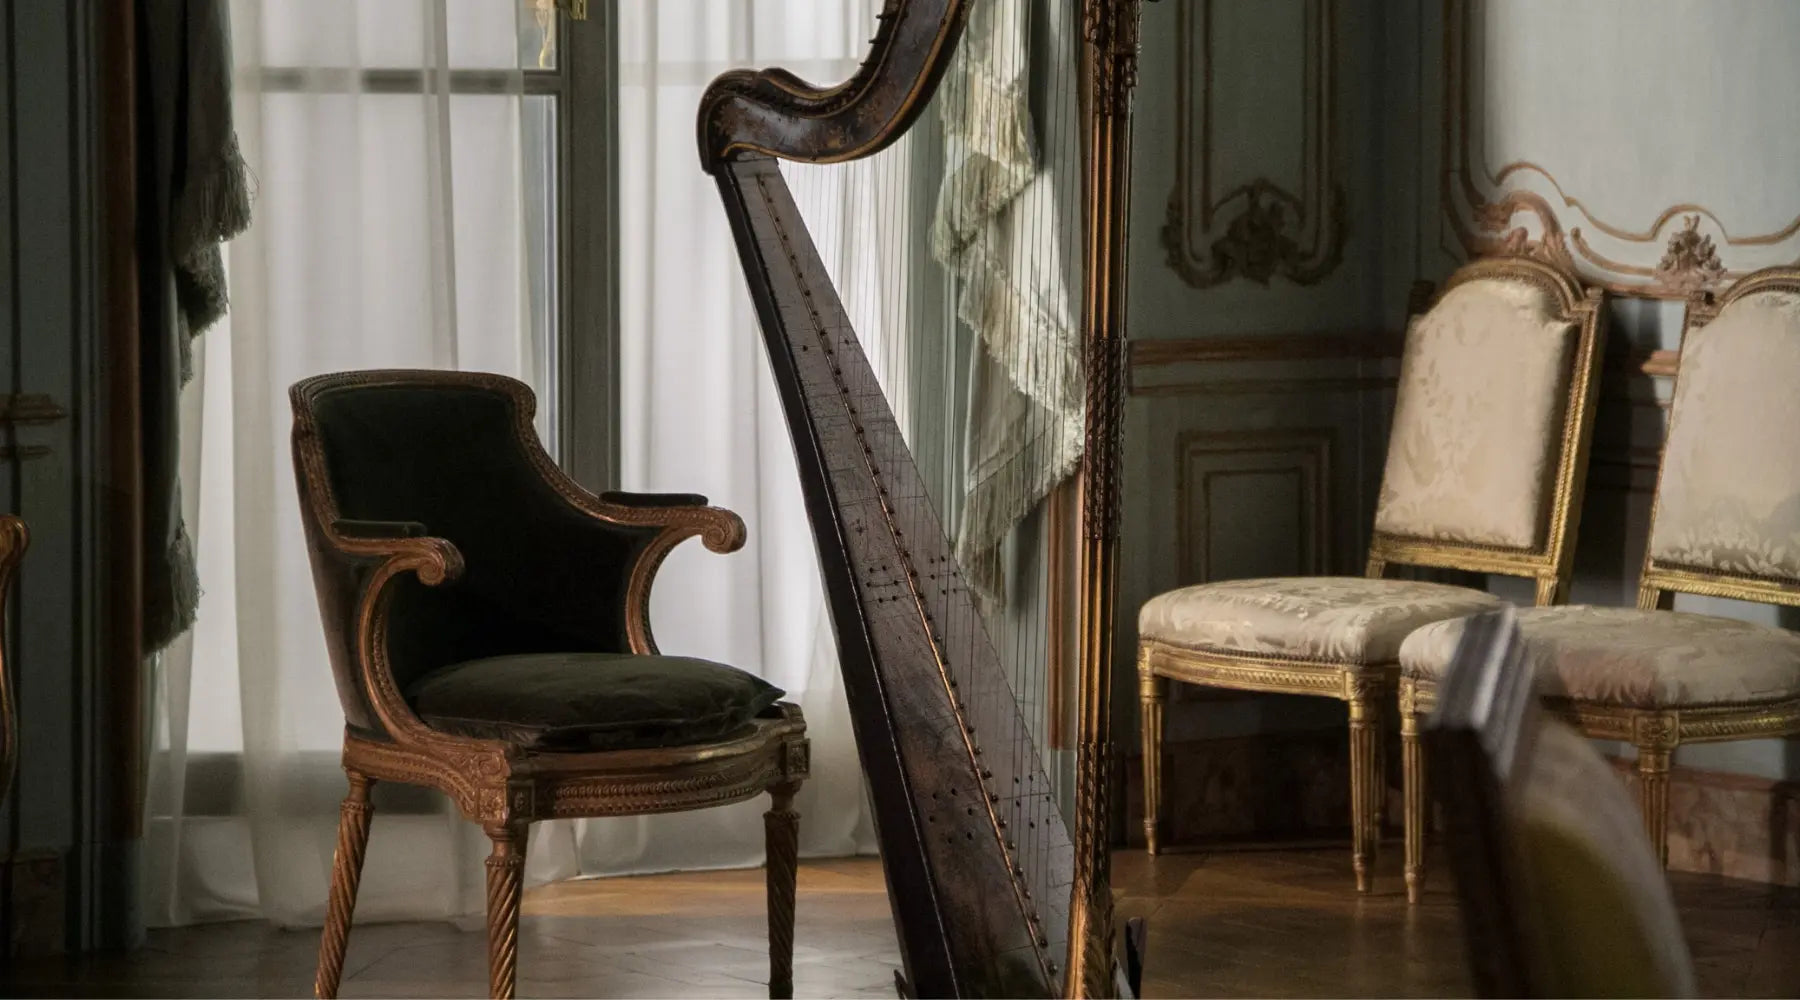 decoration and furniture in rococo style with antique harp